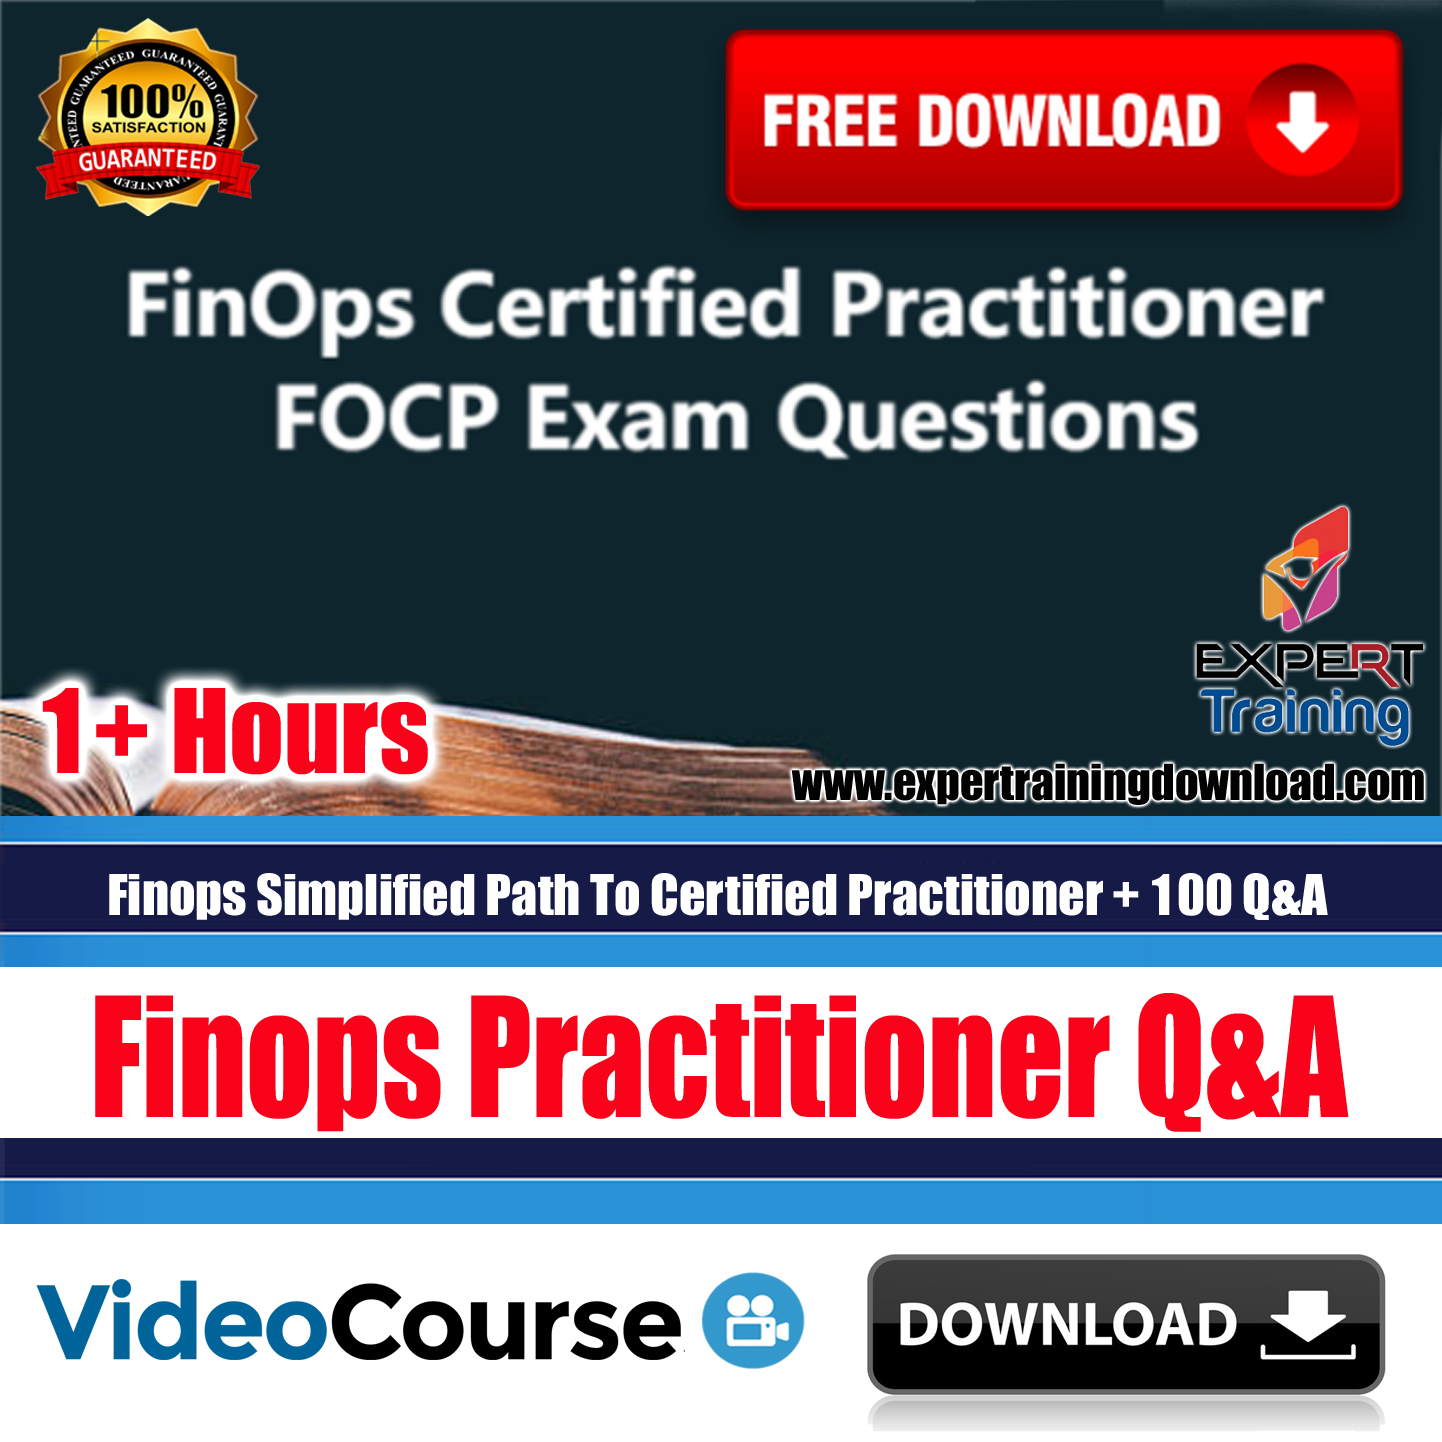 Finops Simplified Path To Certified Practitioner + 100 Q&A